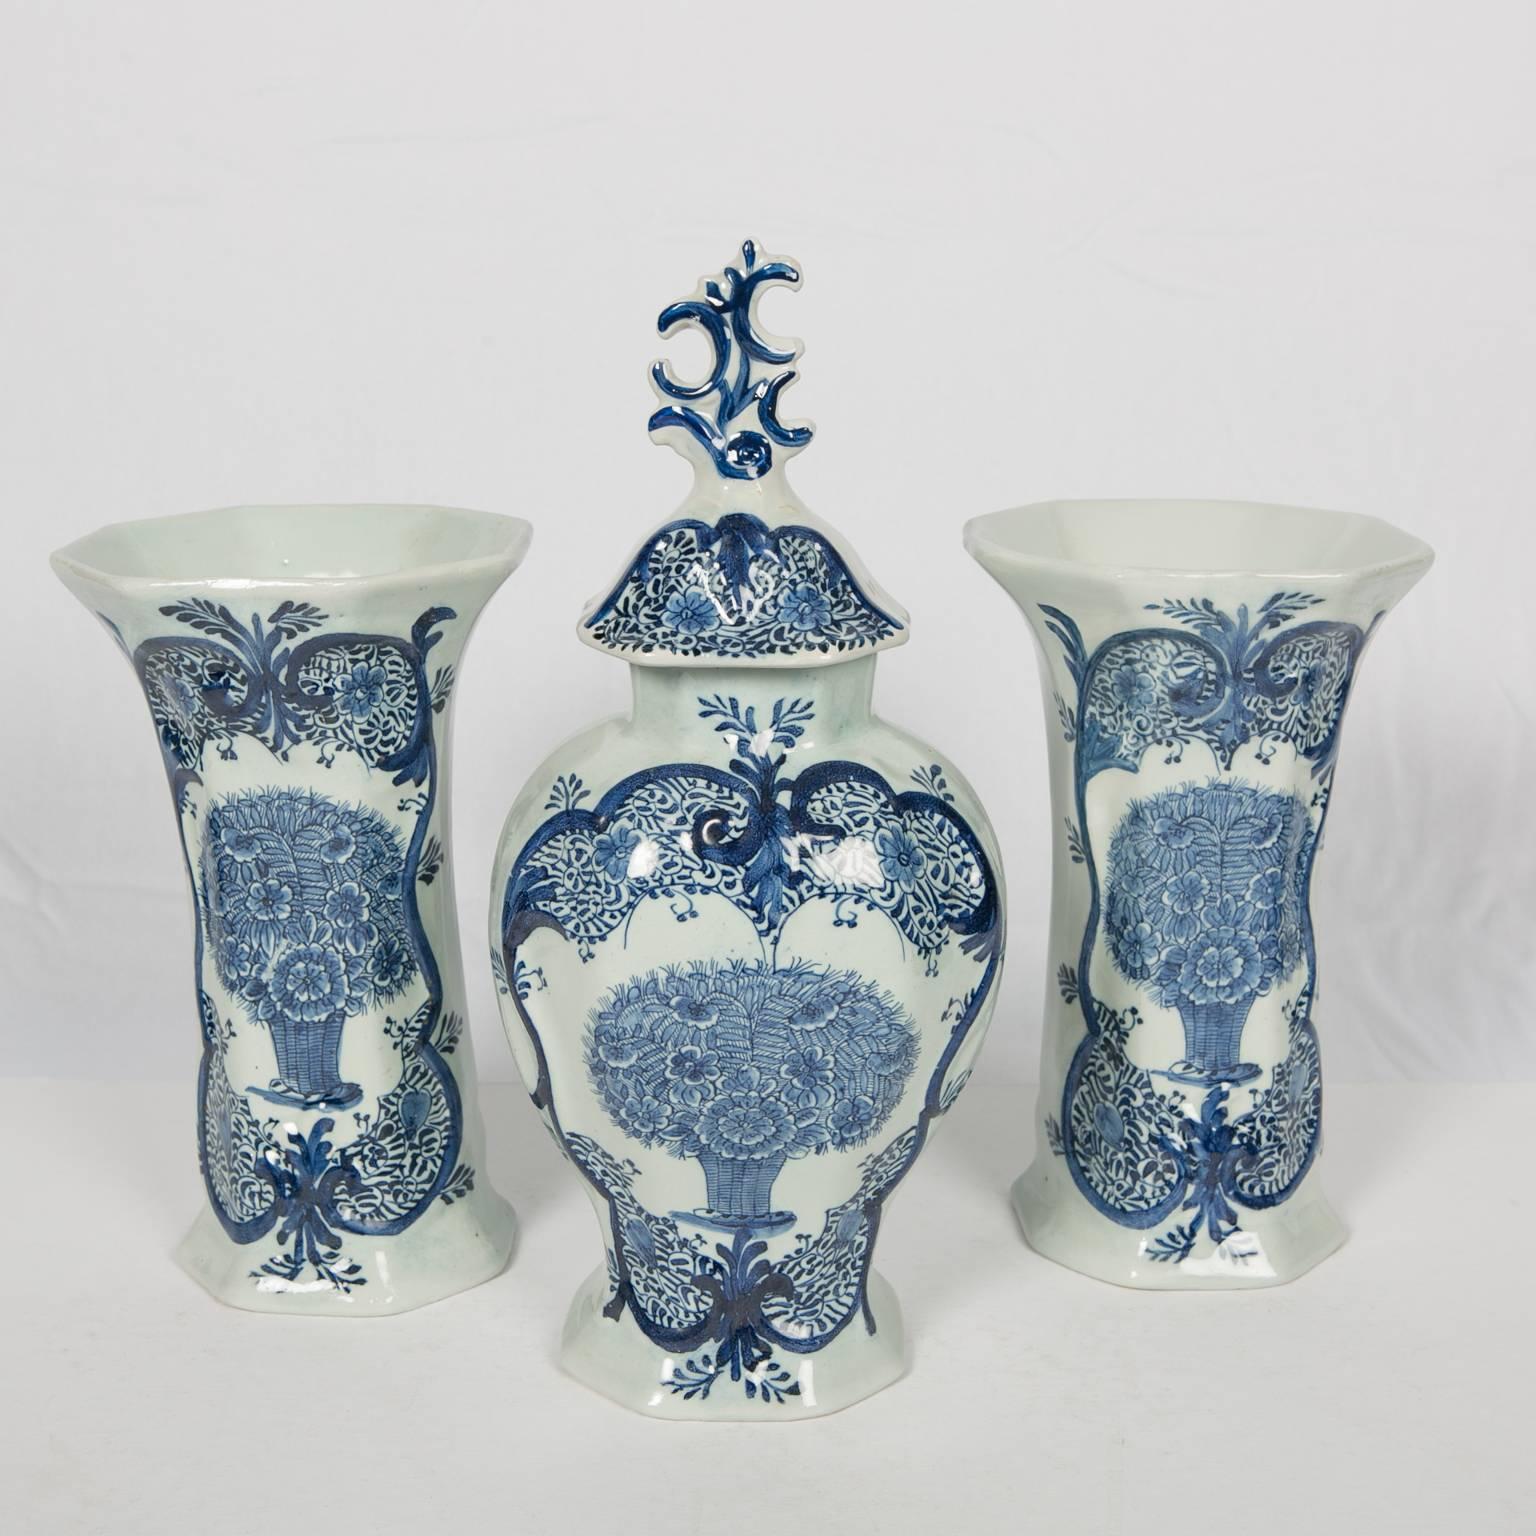 Made in the mid 18th century this blue and white Delft three piece mantle garniture is painted with a traditional design in cobalt blue. Made by the Dutch Delft factory 